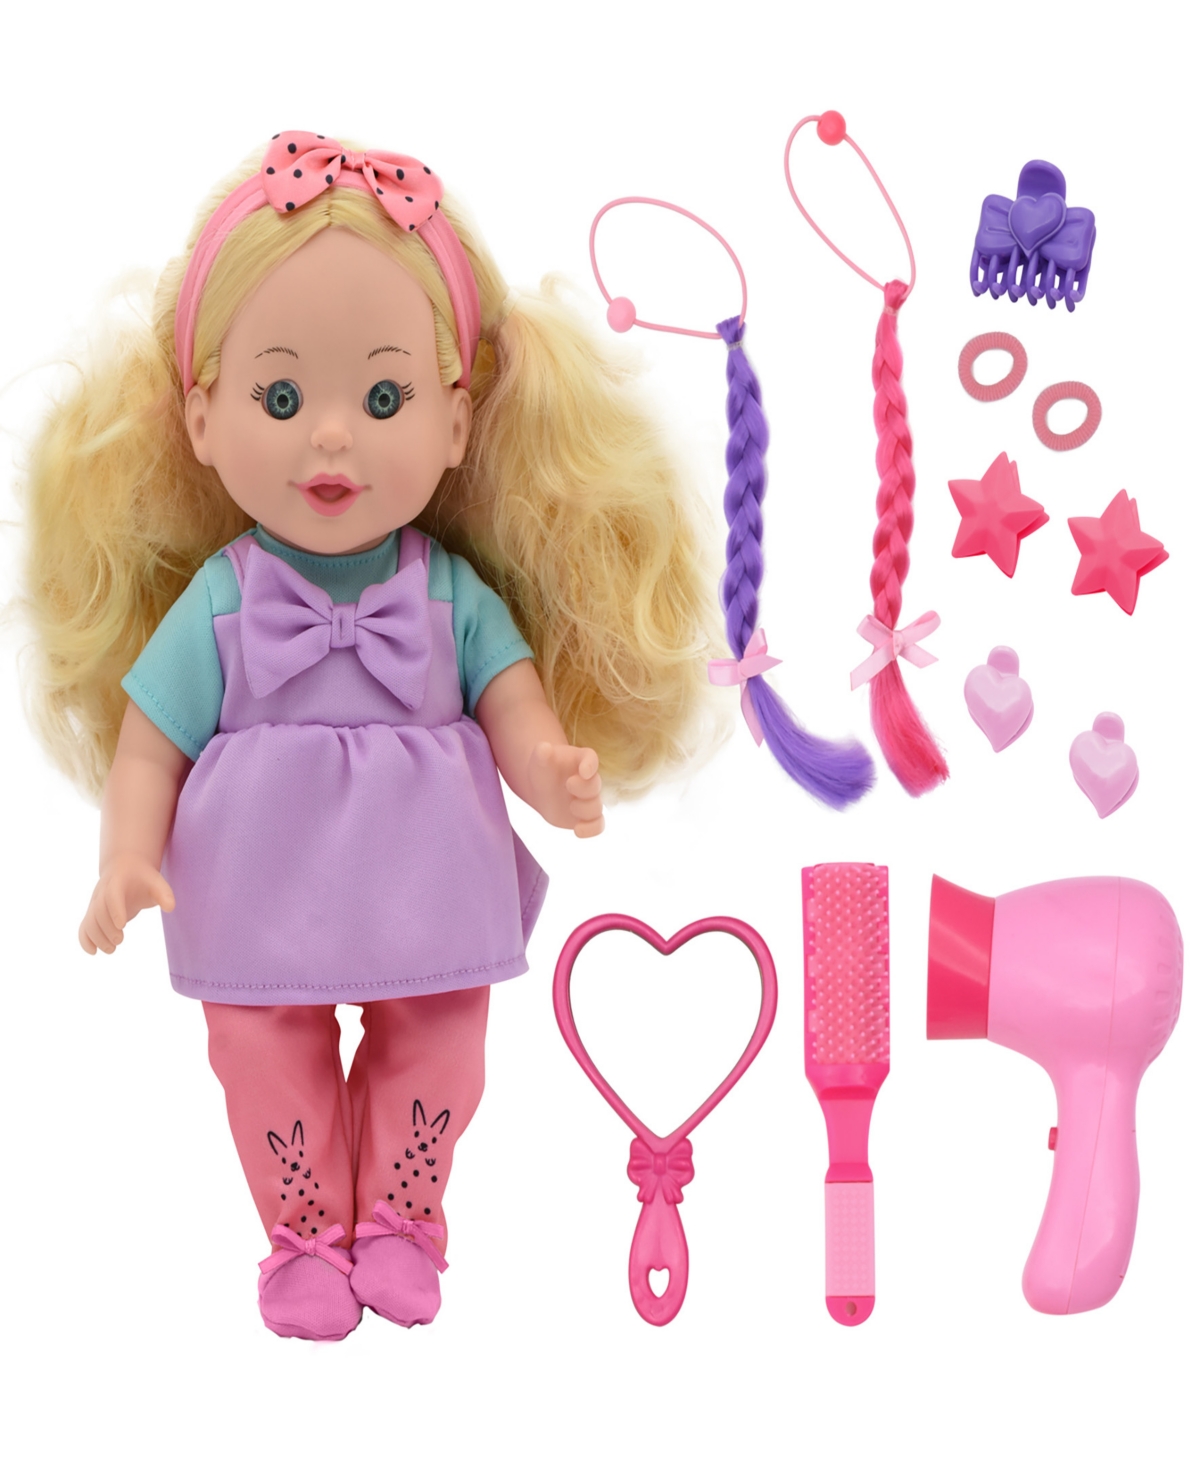 Lil Tots Talking Hair Styling Playset 16 Piece 12" Doll Playset, New Adventures, Children's Pretend Play, Age In Multi